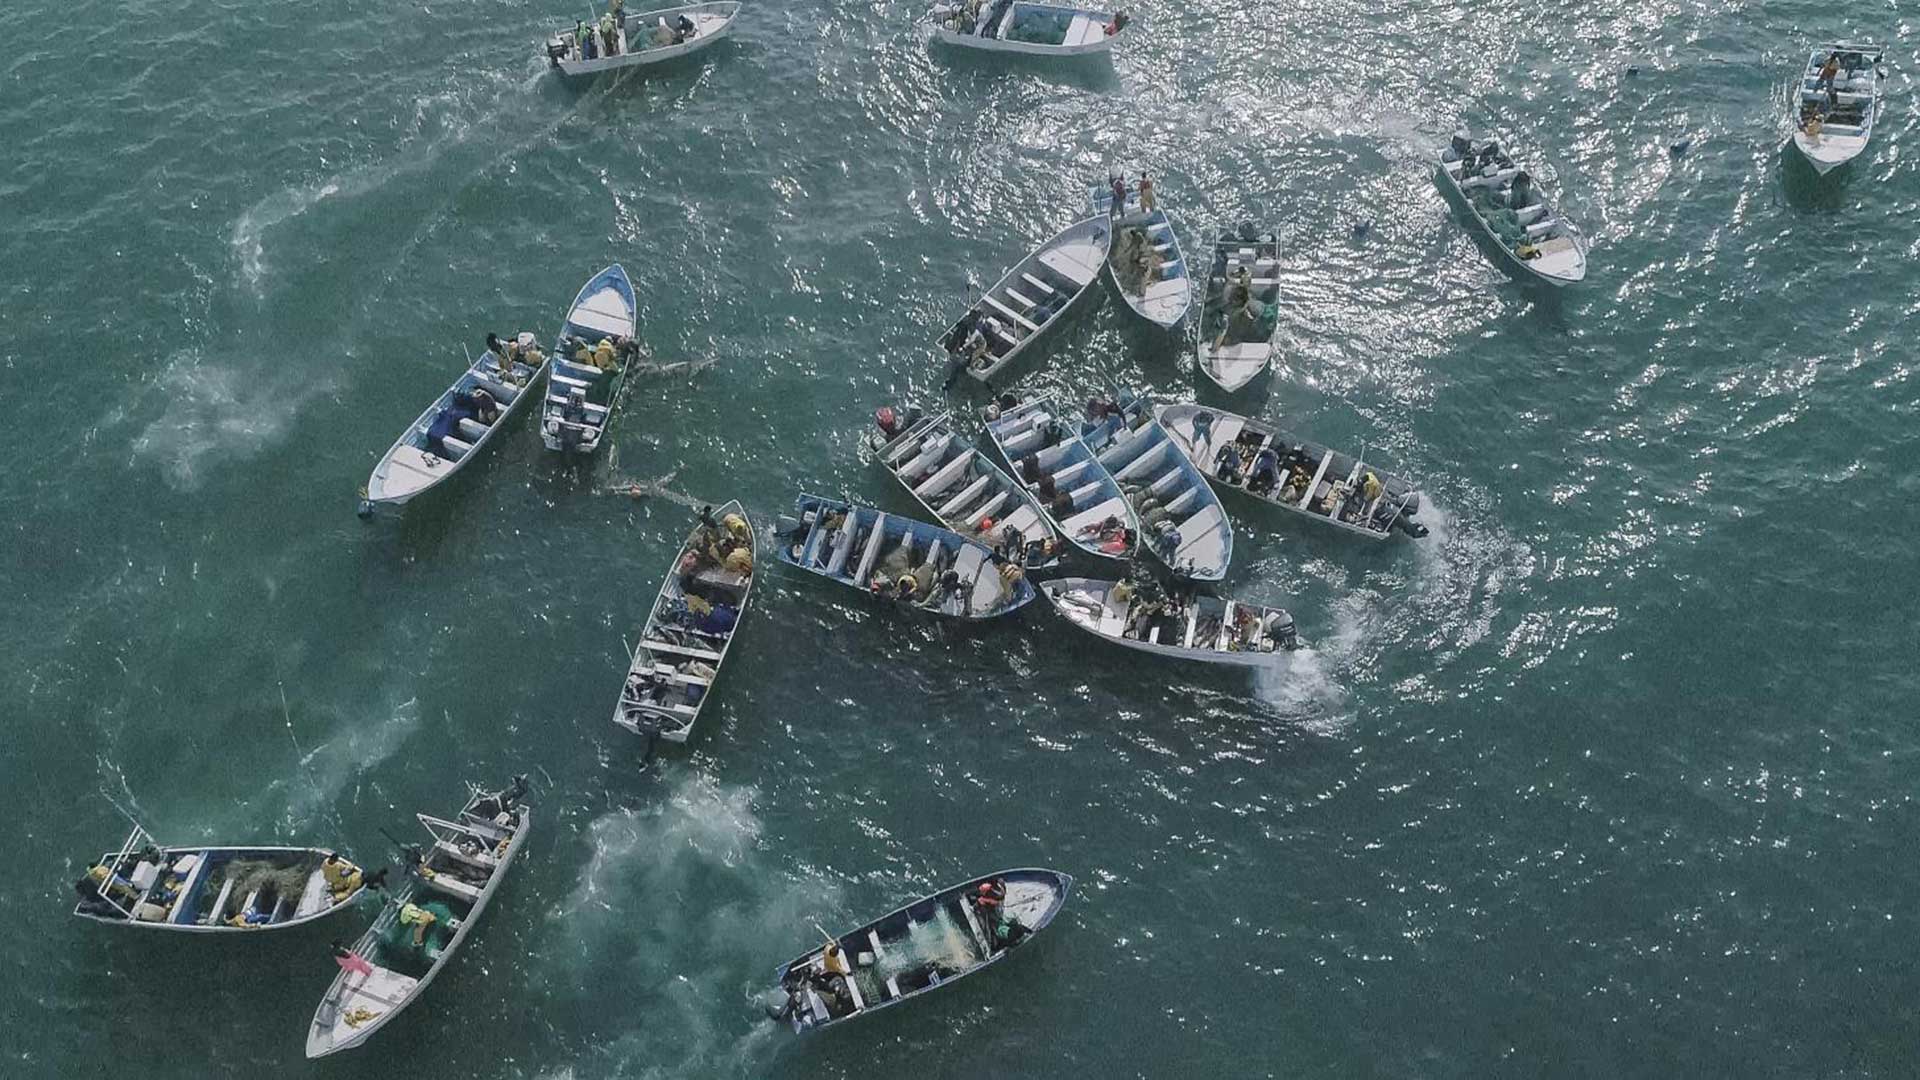 More than 80 small fishing boats illegally cast nets into the Sea of Cortez in an area inhabited by the vaquita marina porpoise on Dec. 8, 2019.